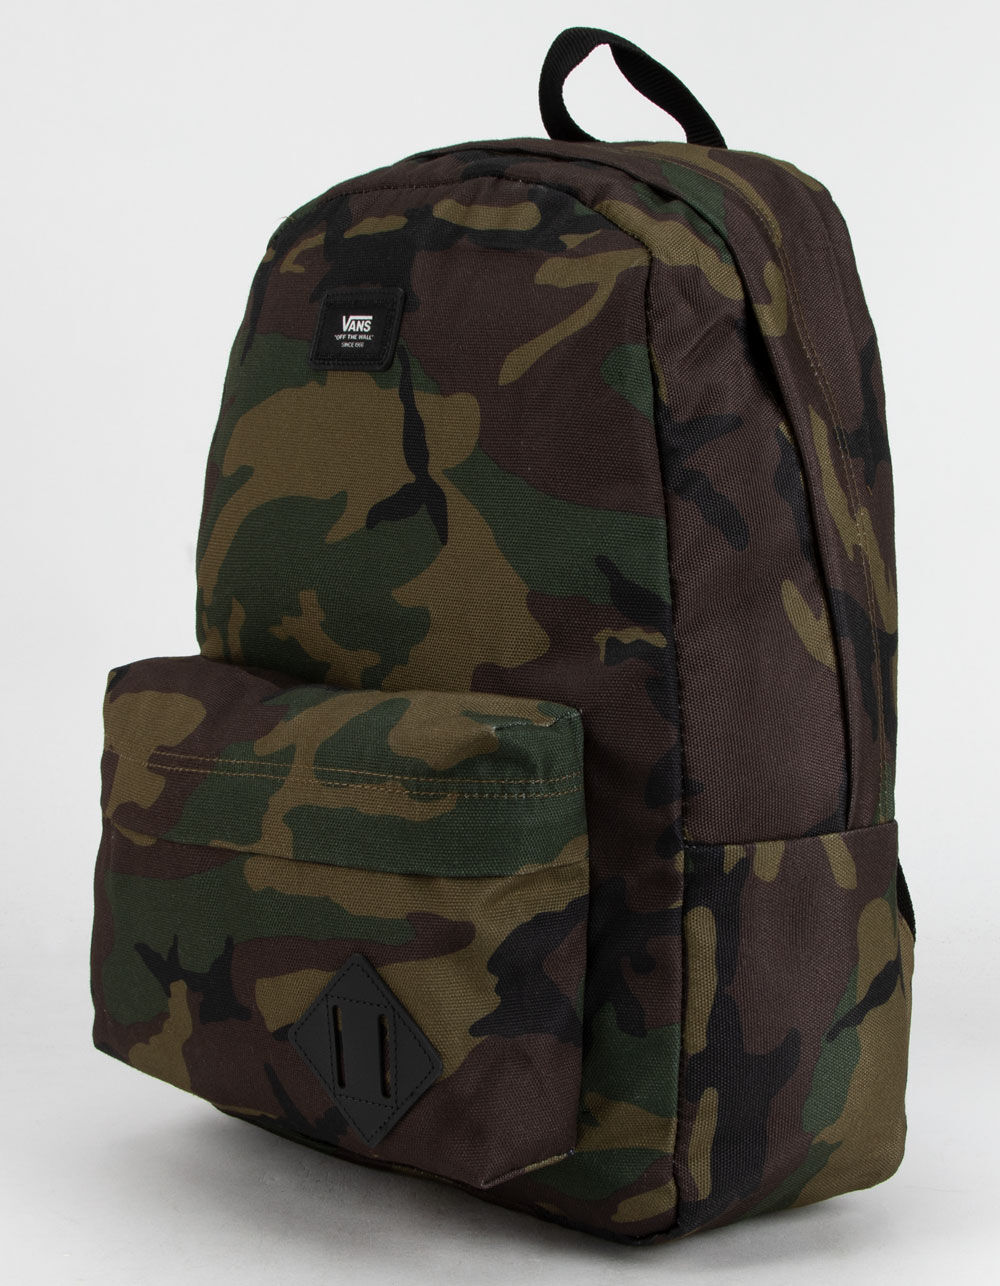 VANS Realm Classic Camo Backpack image number 1